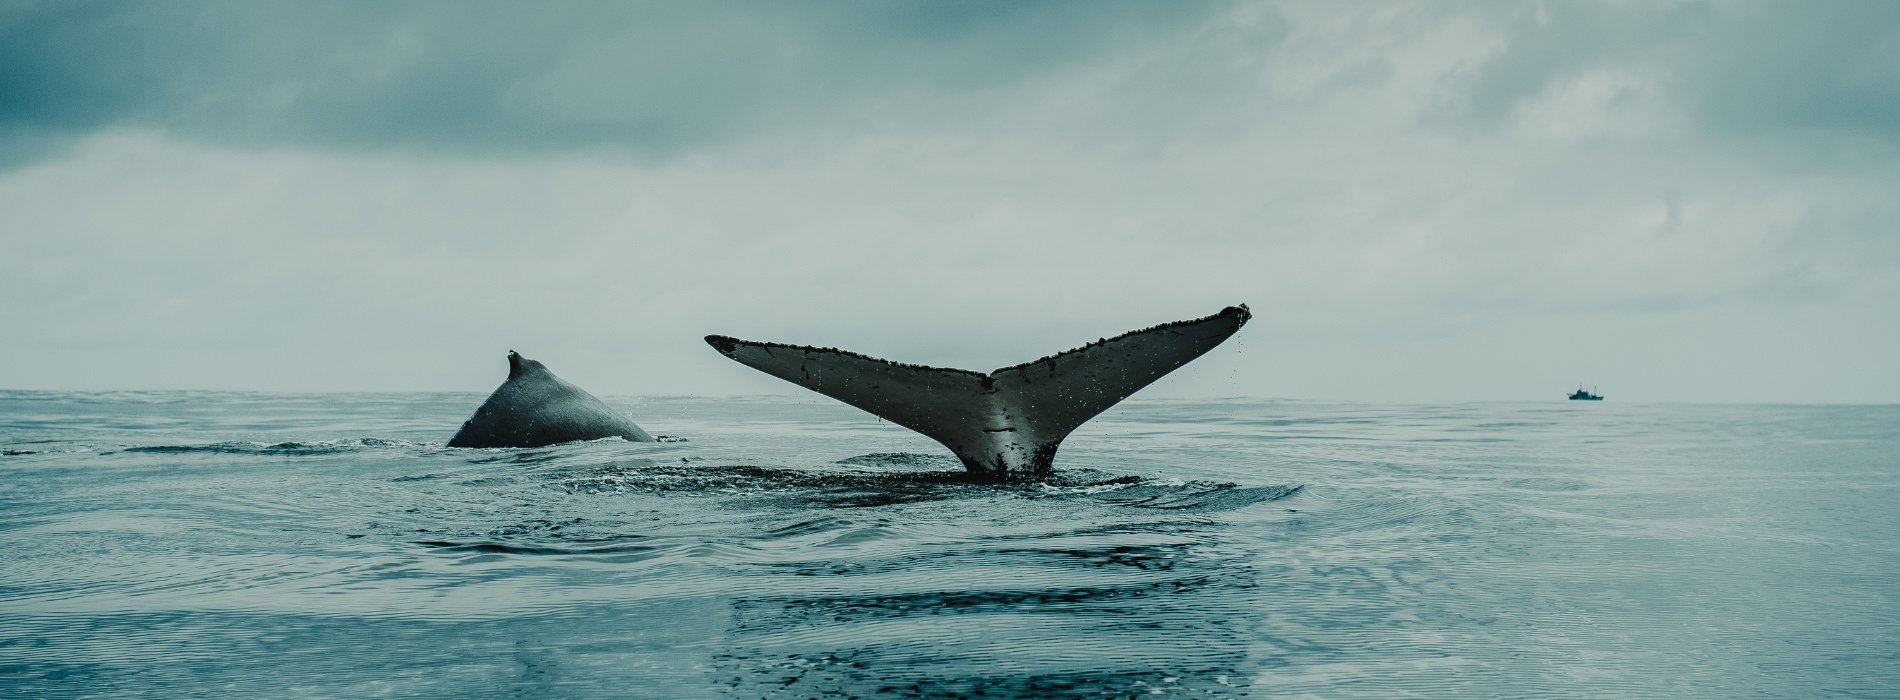 Multiple whales breeching, one tail and one dorsal fin above the surface of the ocean